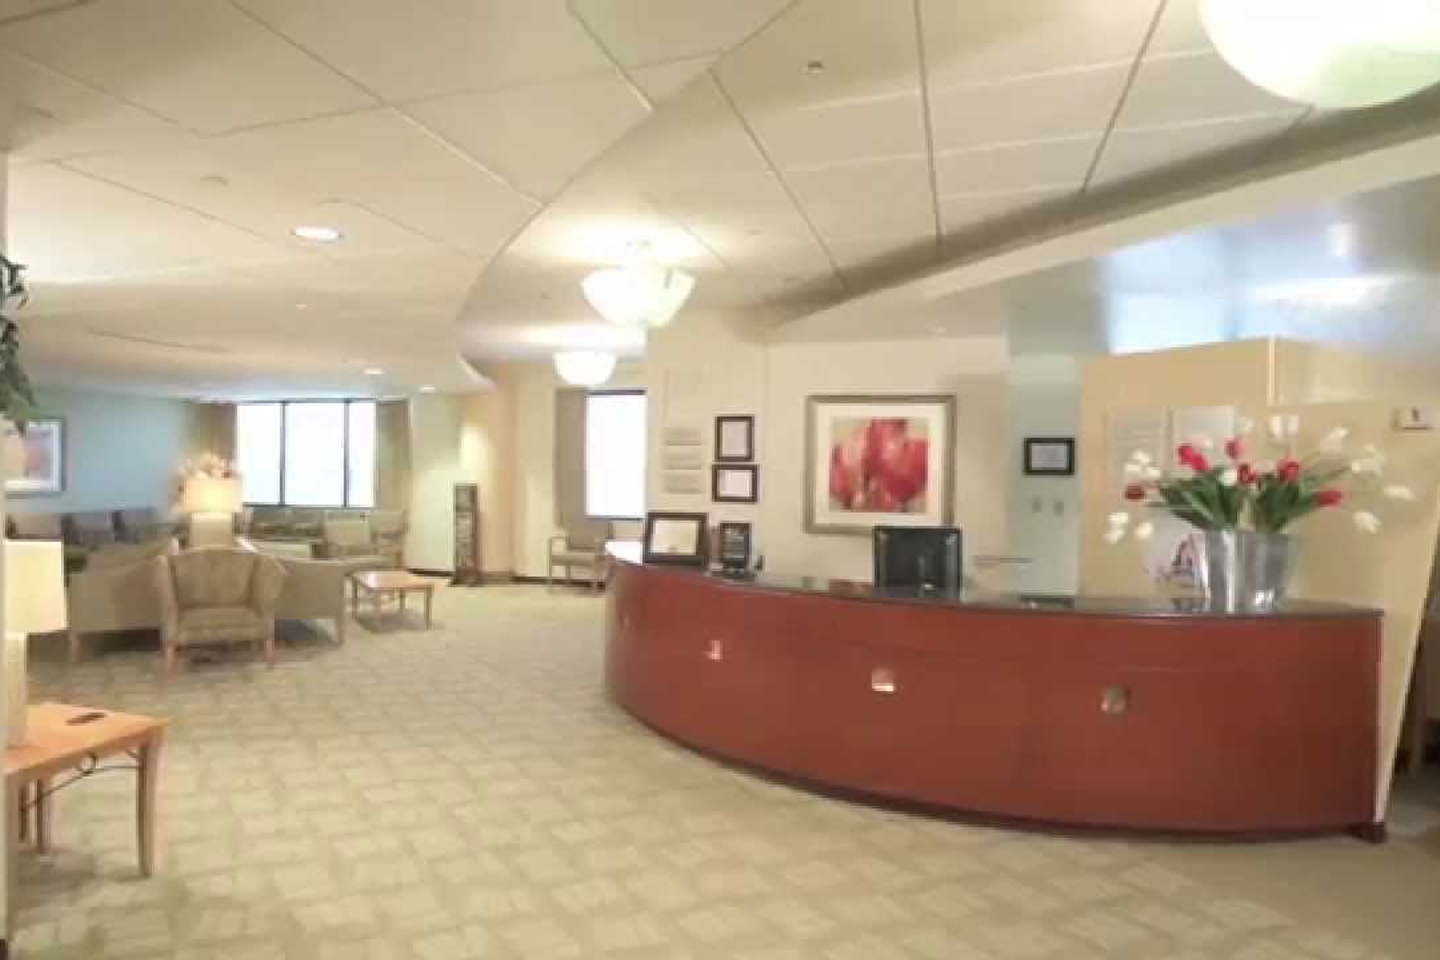 Interior lobby of the Reston Hospital Women's Imaging Center, with a nurses station and a patient waiting room with wingback chairs.